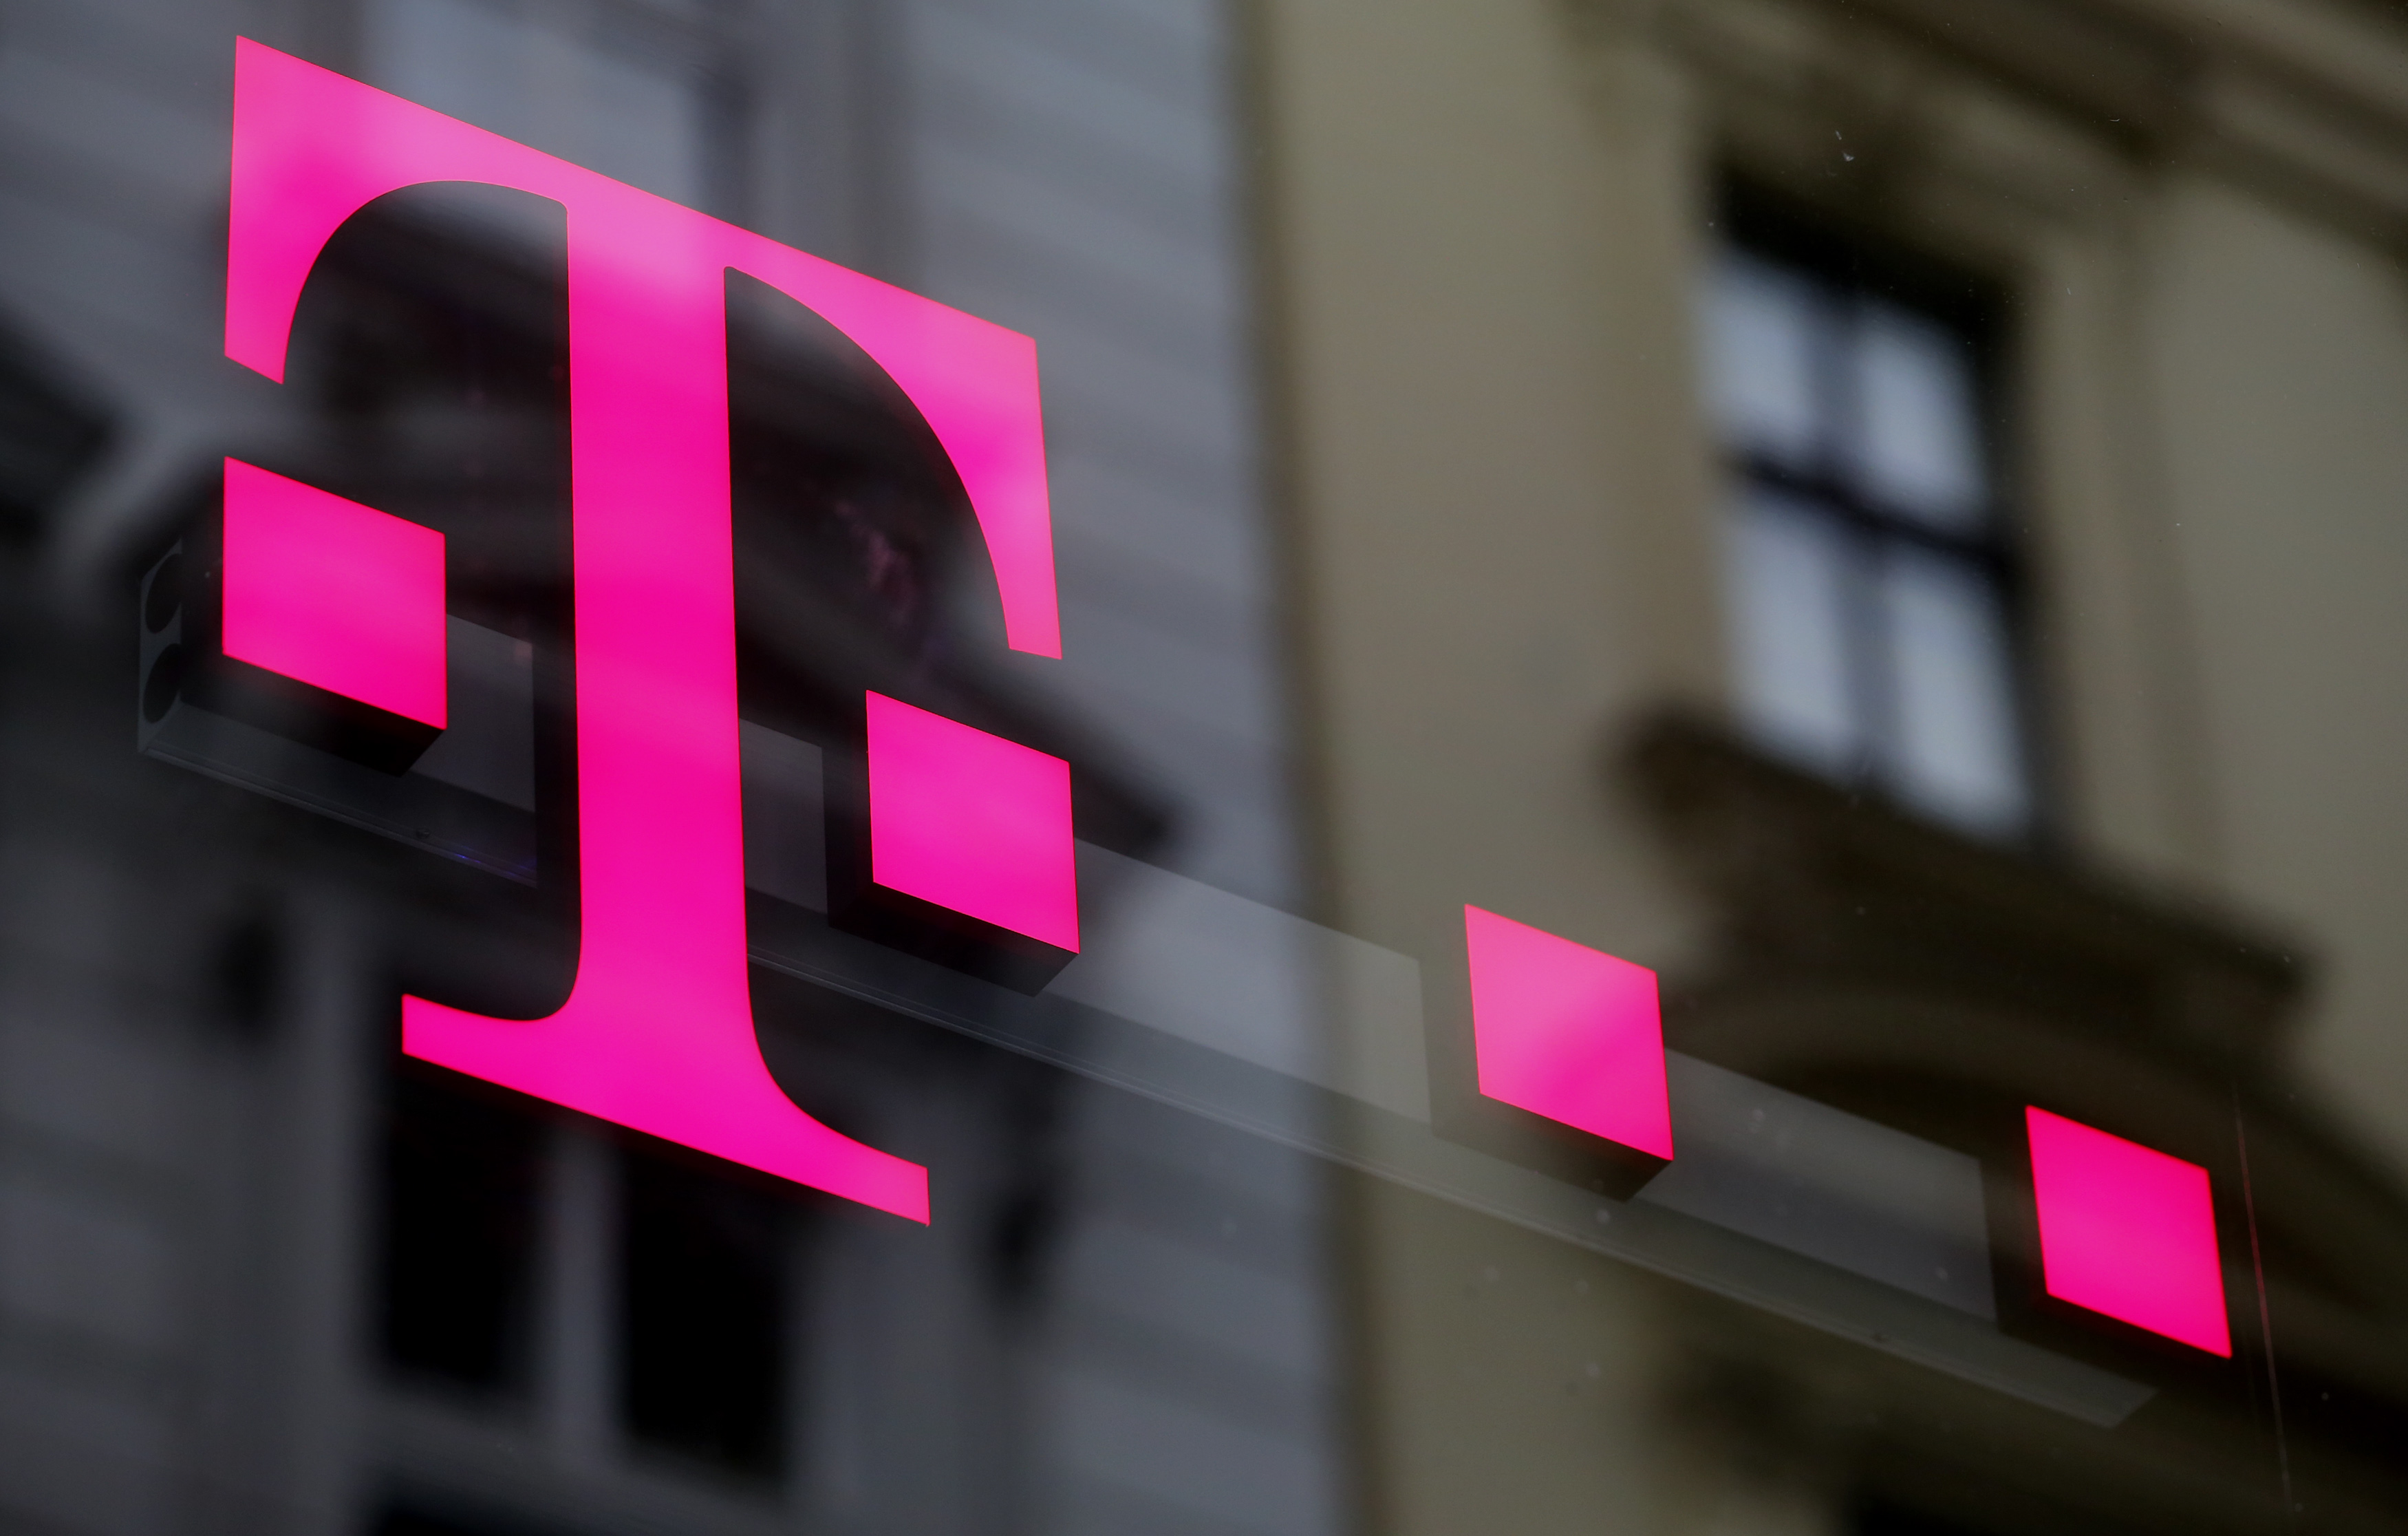 The logo of T-Mobile Austria is seen outside of one of its shops in Viennaa, Austria, February 25, 2016.   REUTERS/Leonhard Foeger/Files